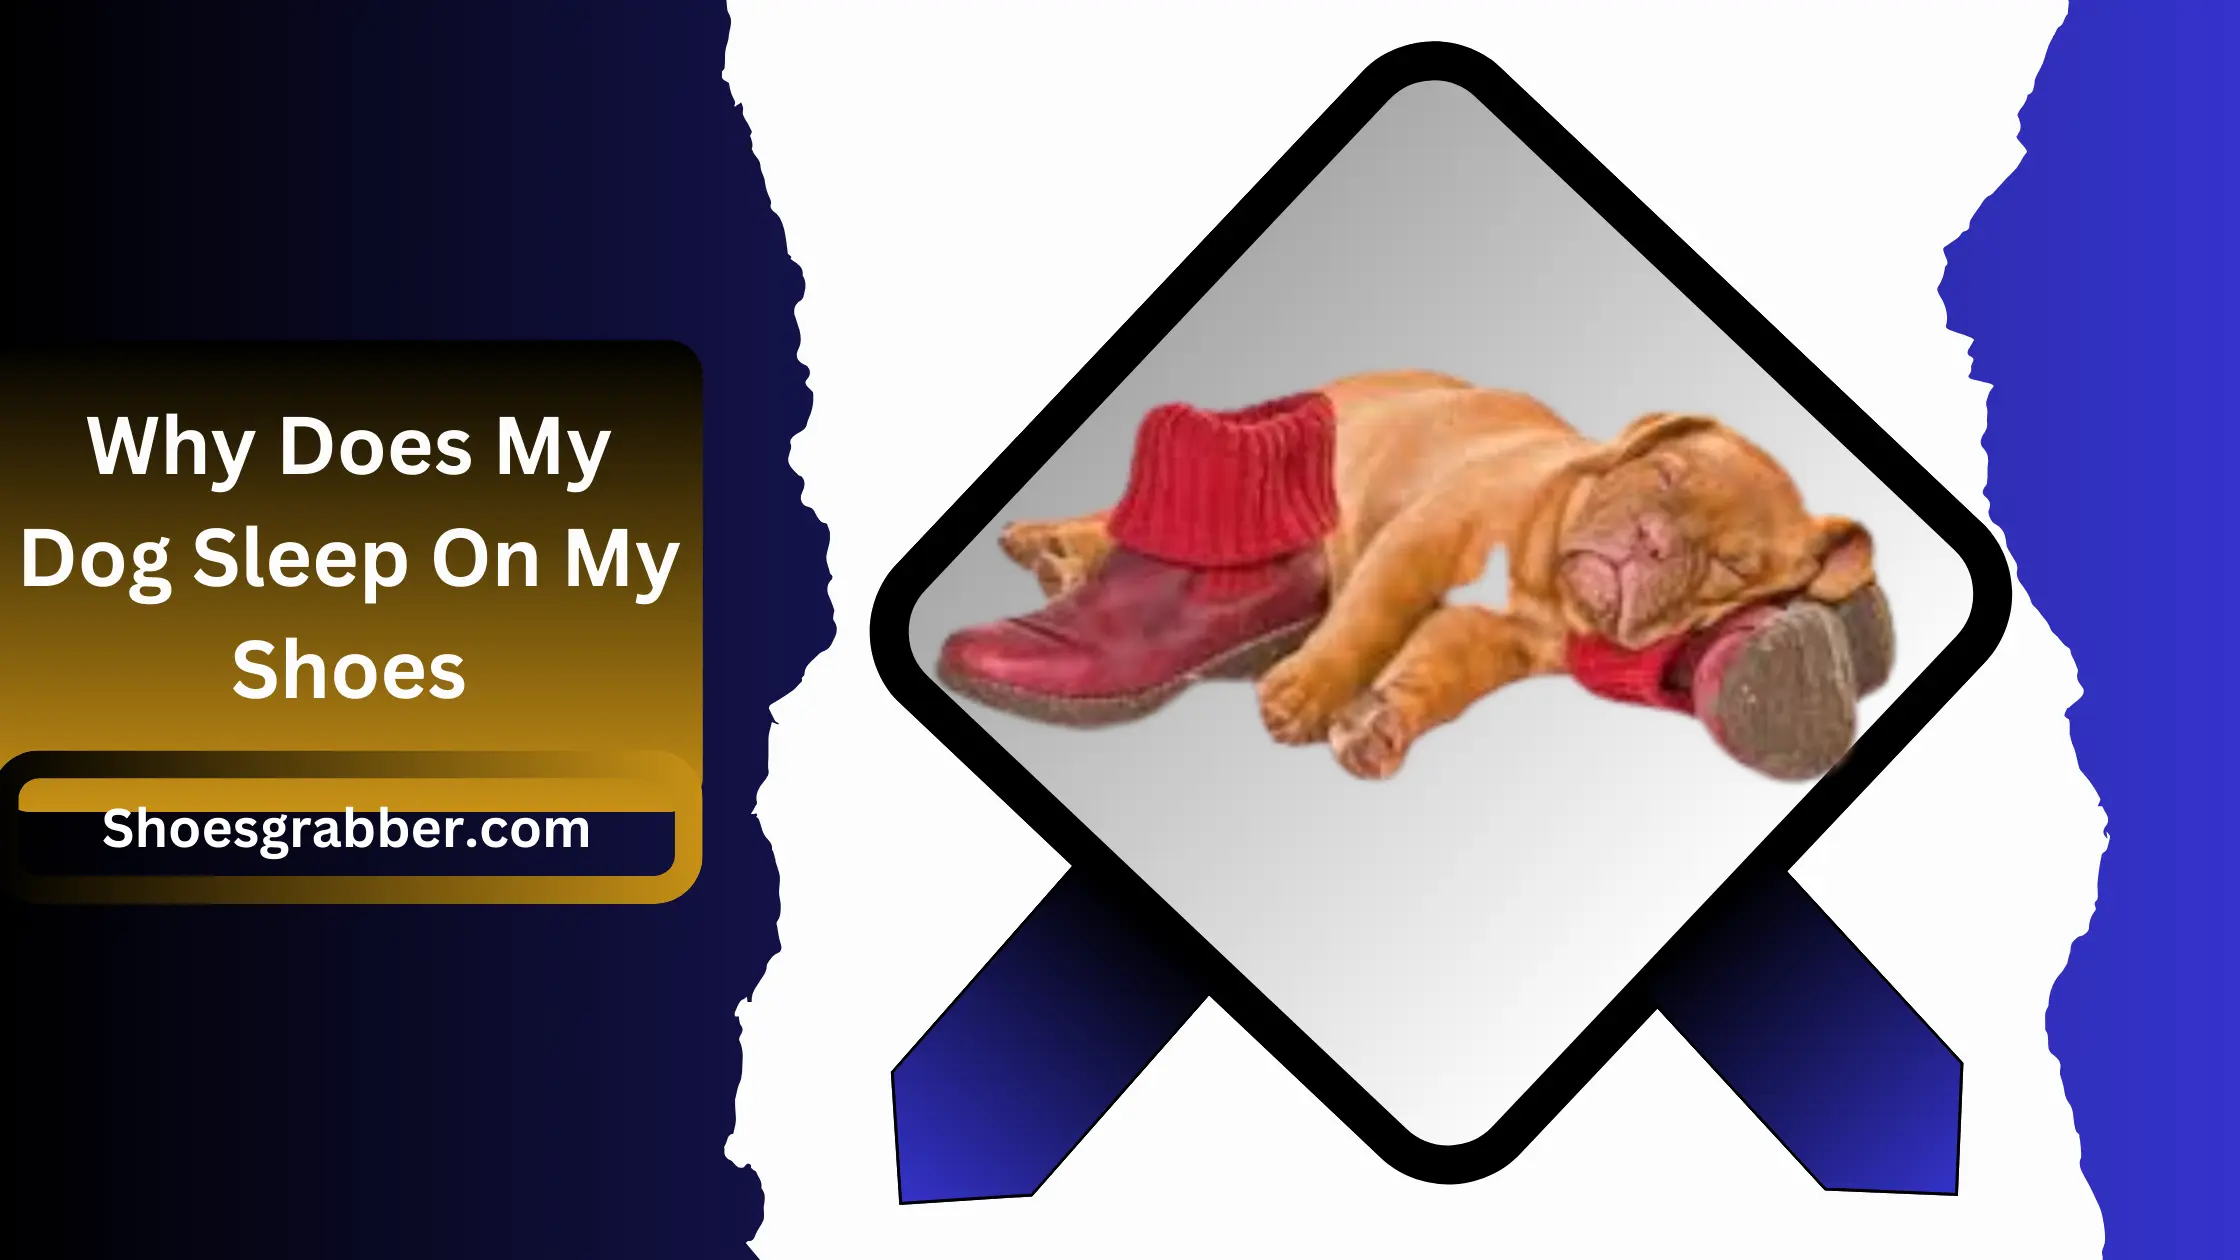 Why Does My Dog Sleep On My Shoes: Find Out Here!